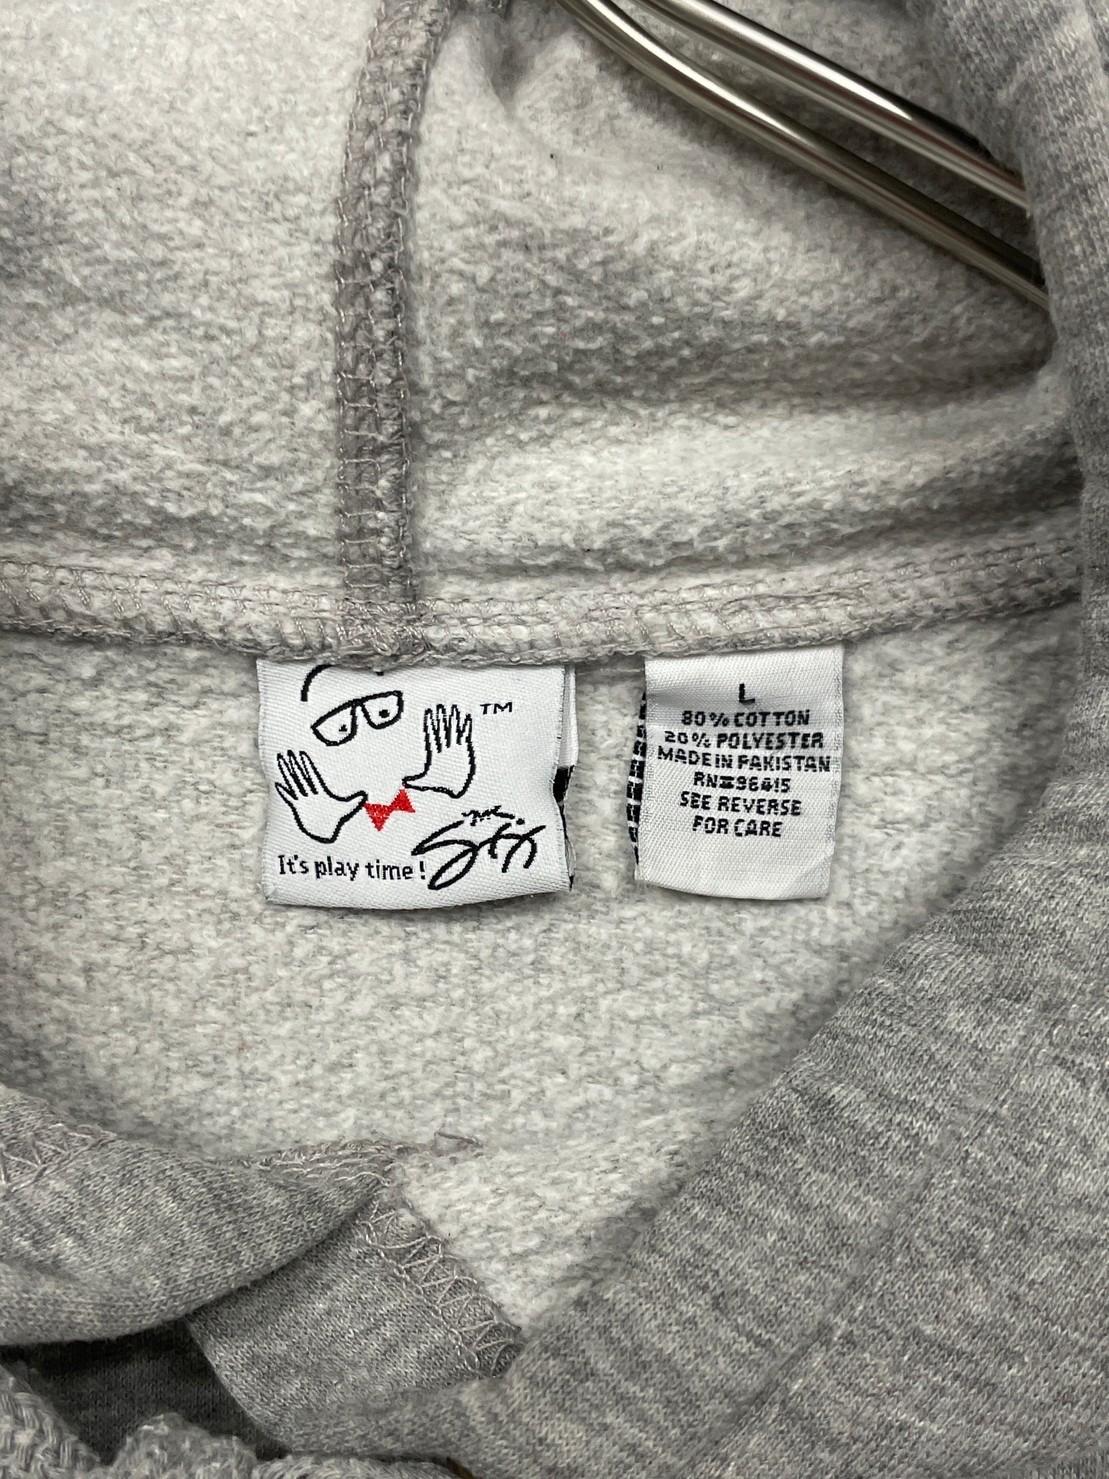 00’s “Mr. SIX” Embroidered Hoodie